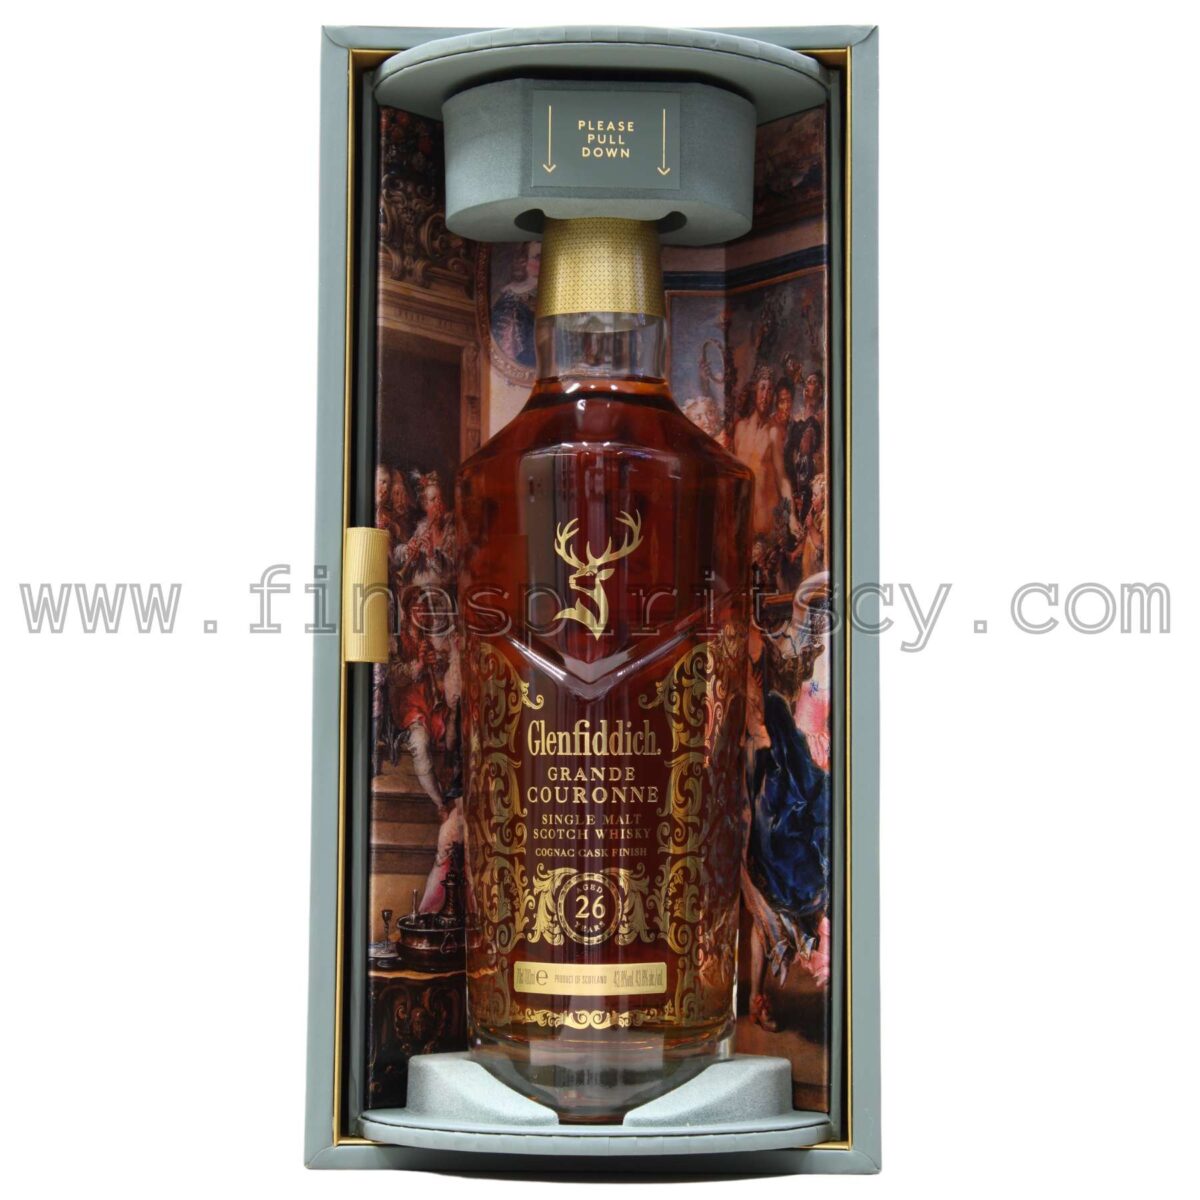 Glenfiddich 26 Years Old Grande Couronne Open Box Bottle Cyprus Price Order Online